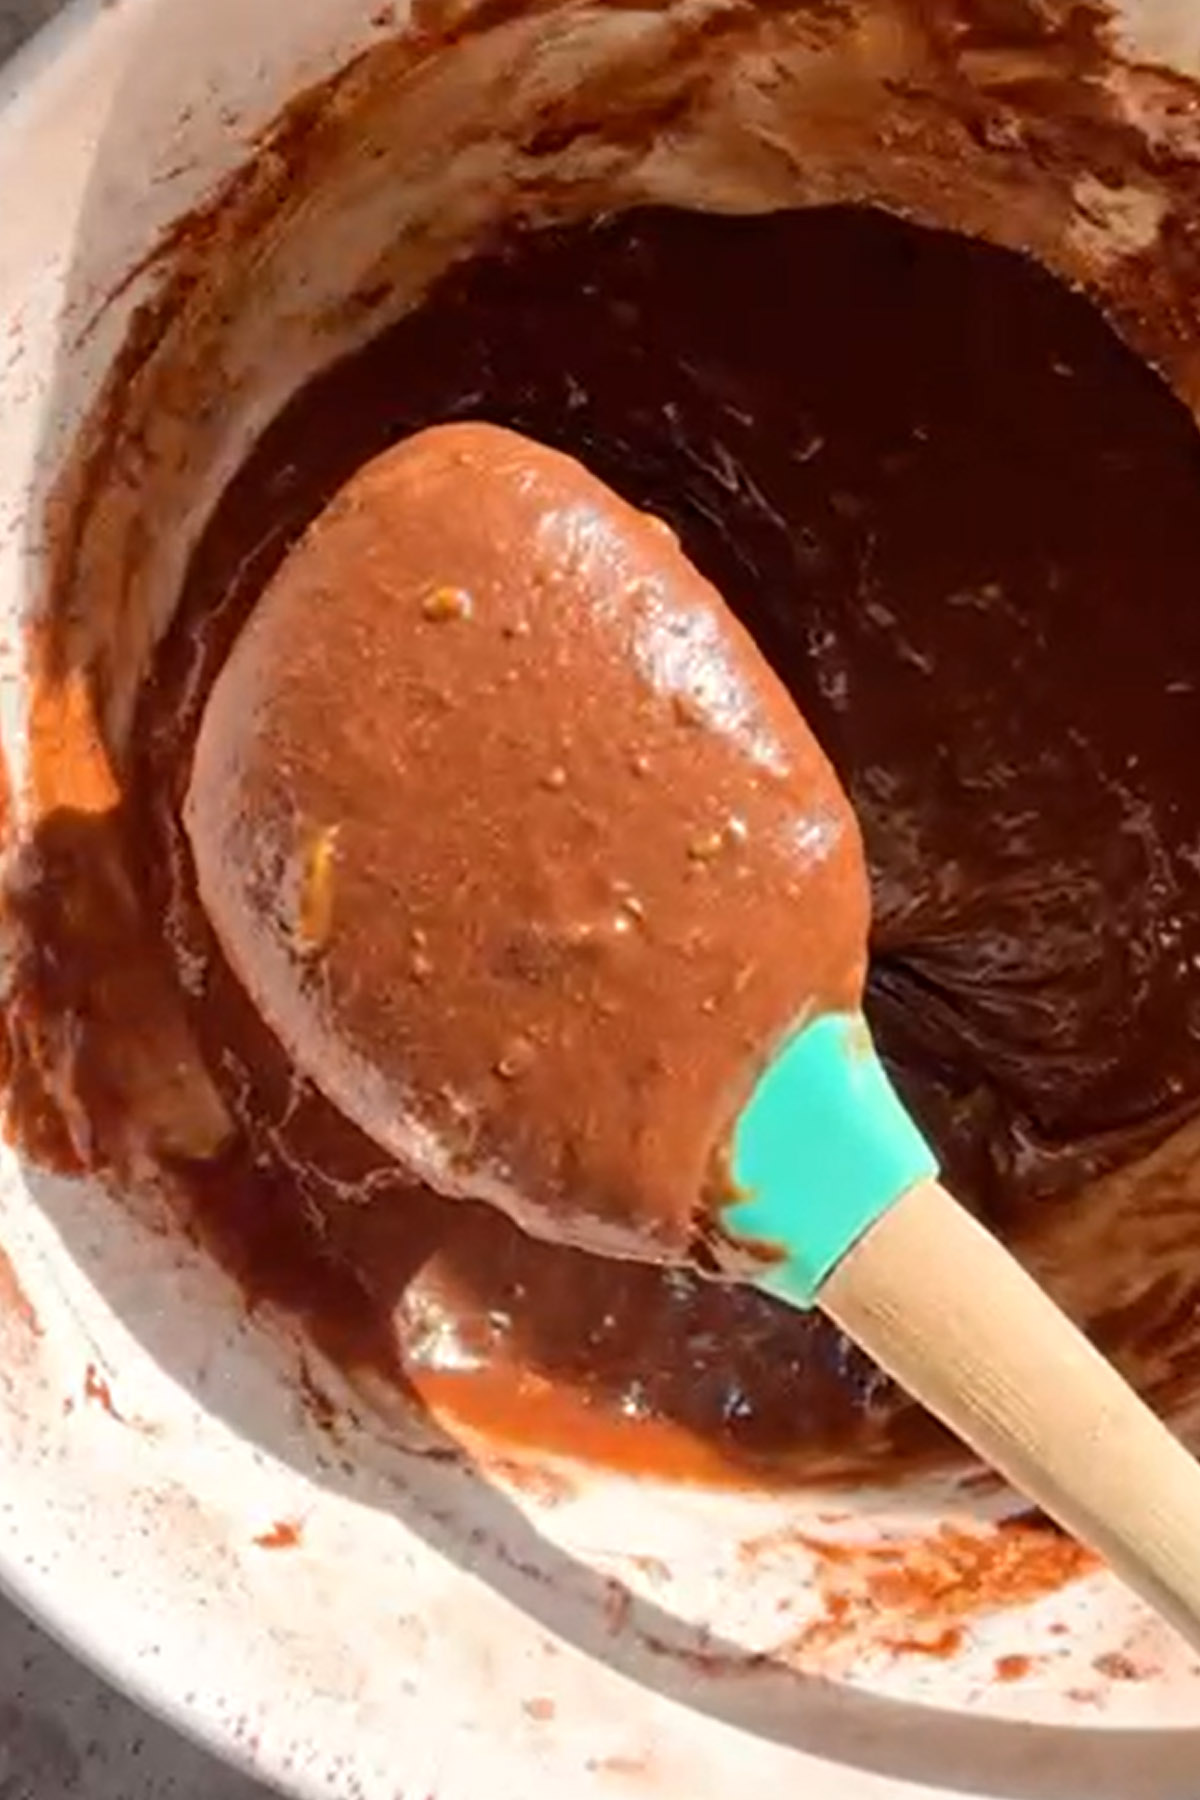 Brownie batter is lifted on a spatula to show texture.